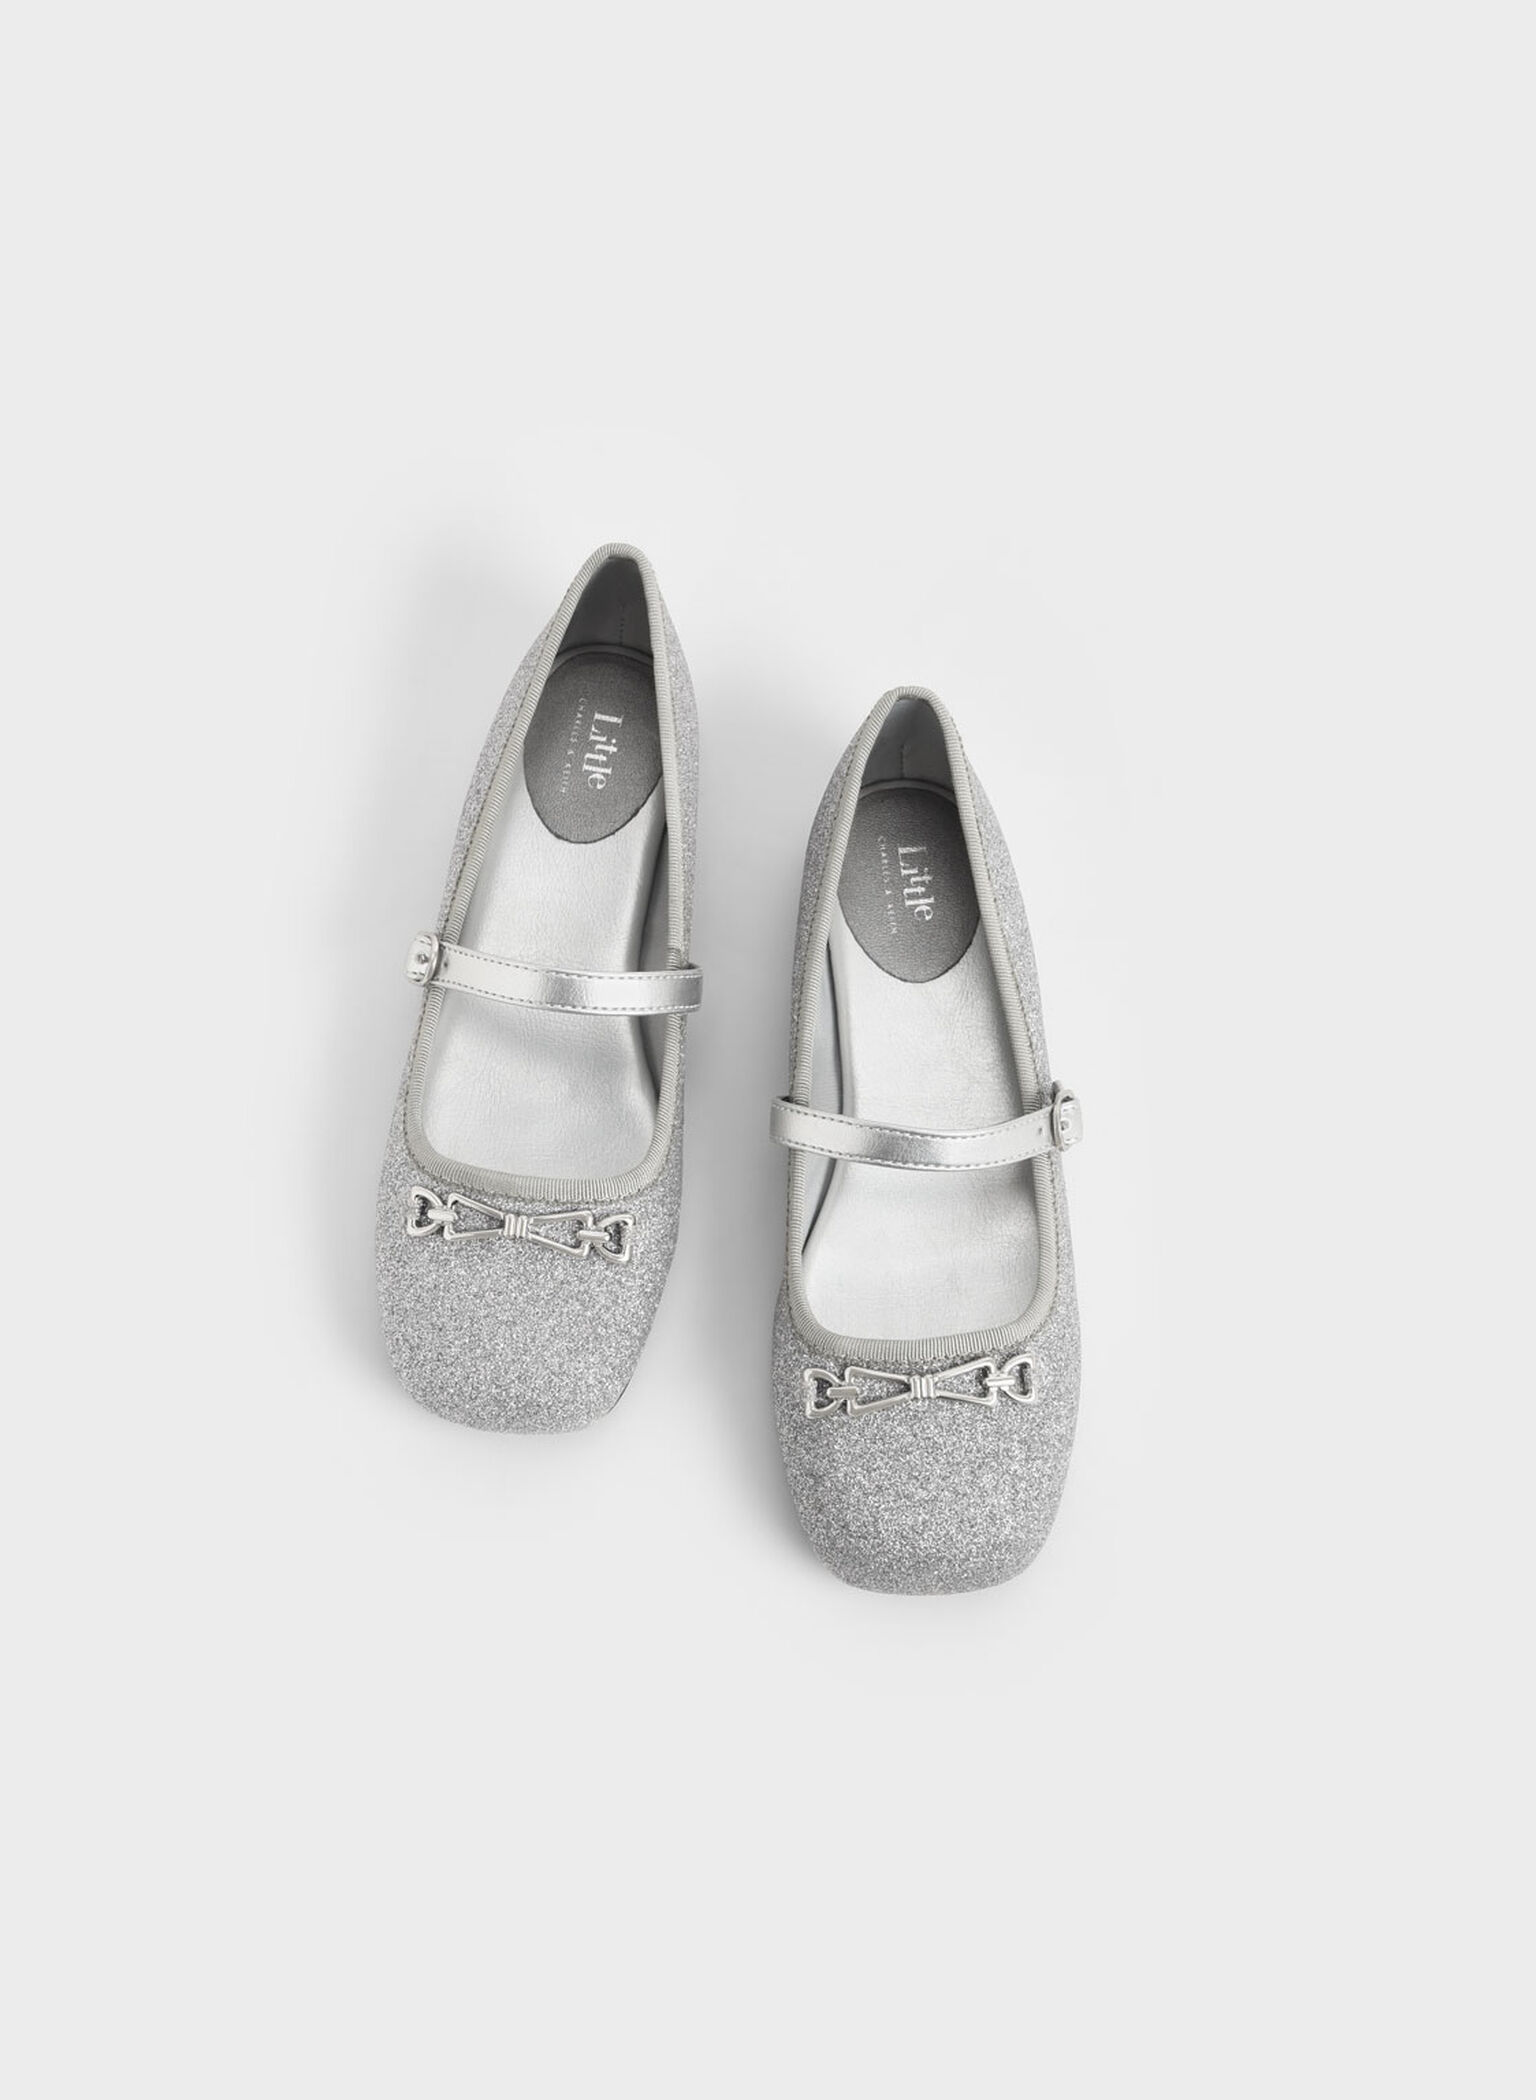 Girls' Metallic Accent Glittered Mary Janes, Silver, hi-res